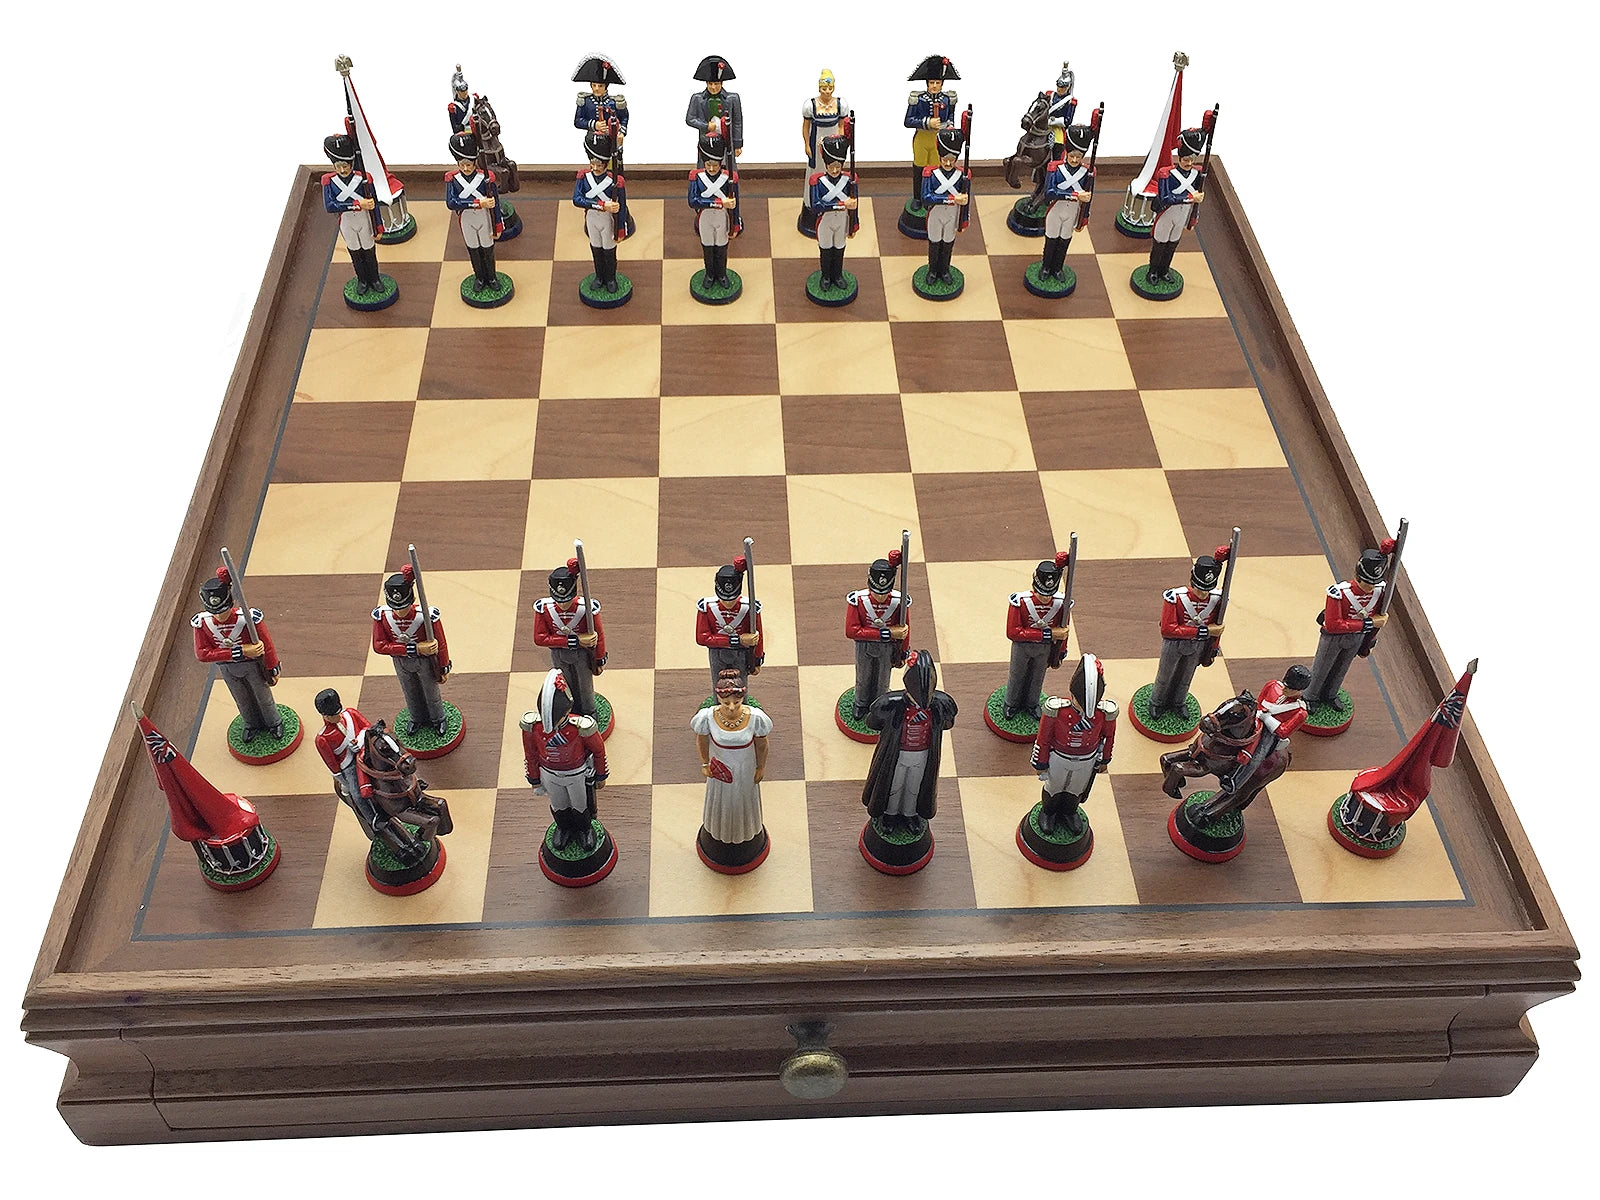 Toy soldier chess set Battle of Waterloo. Hand painted. British and French.